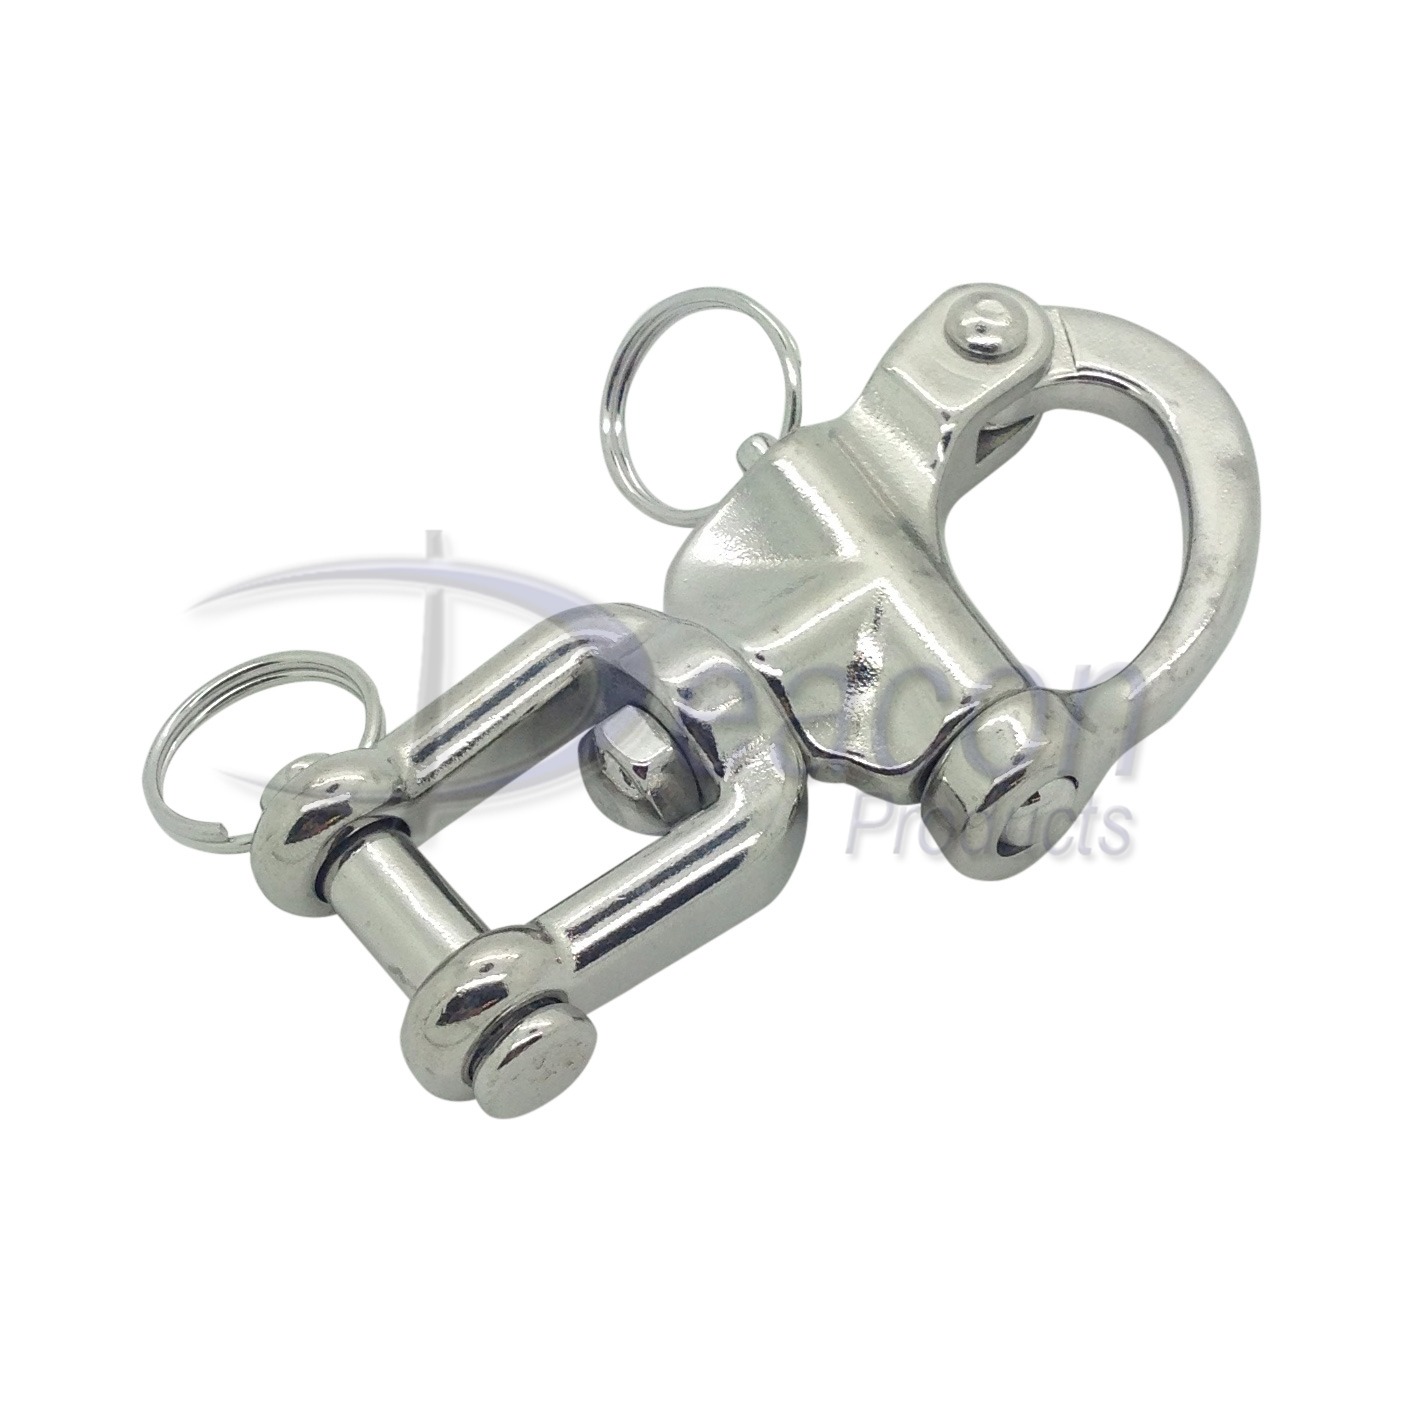 stainless-steel-swivel-jaw-snap-shackle